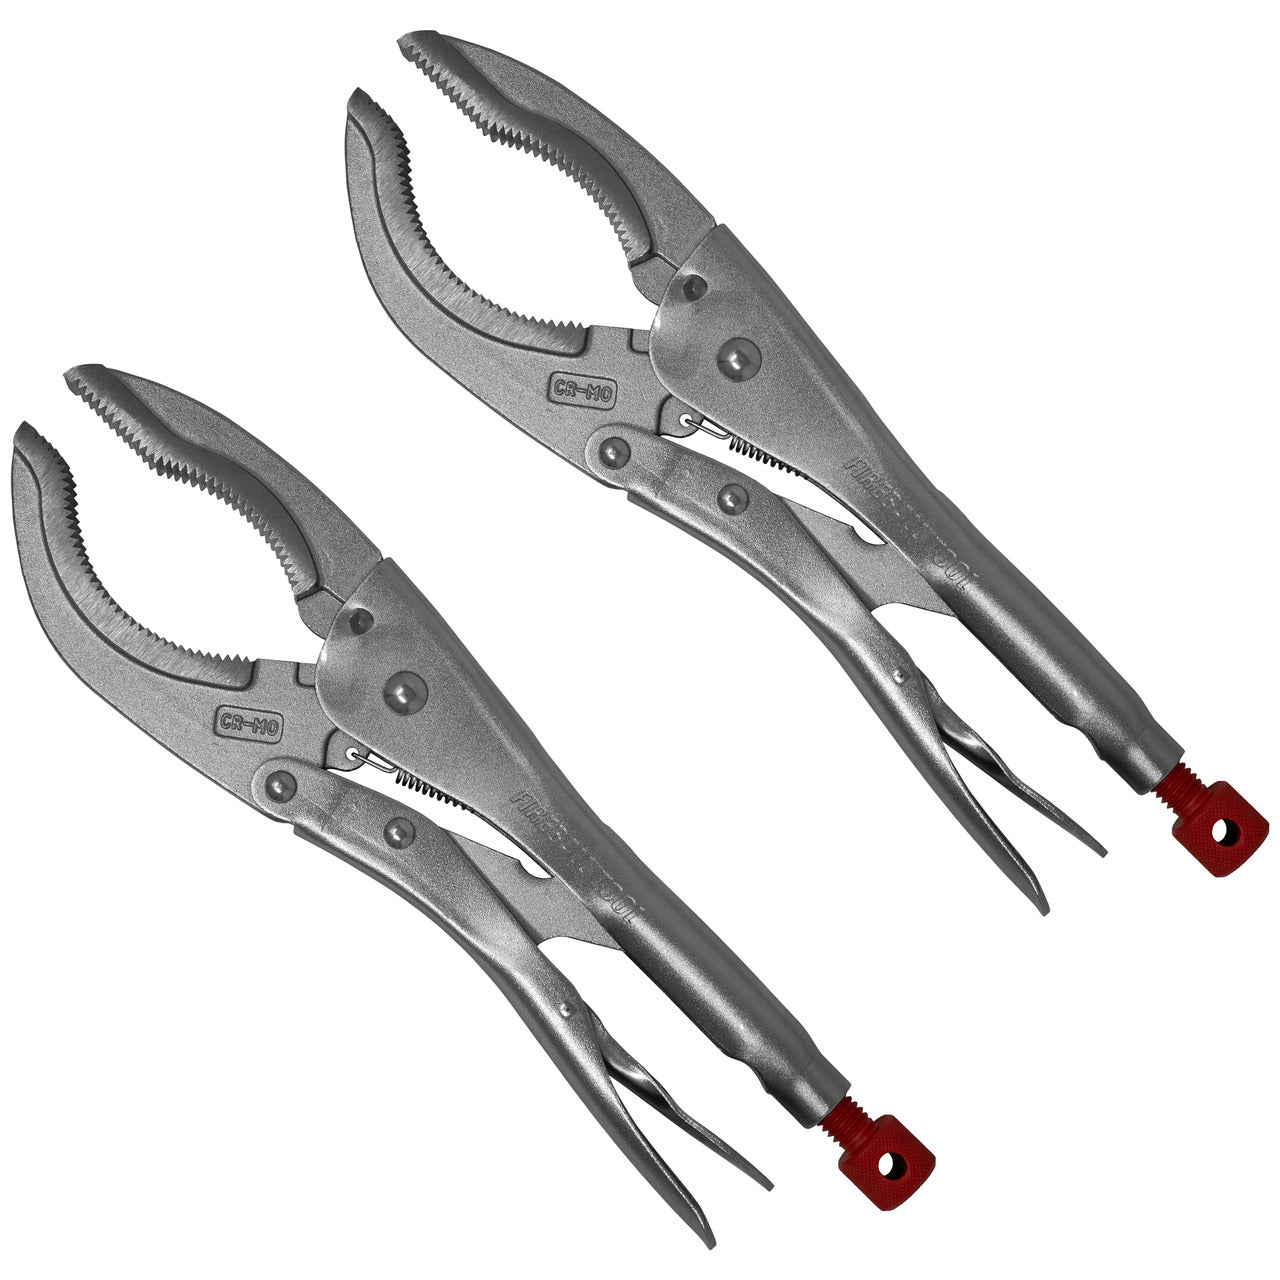  Eagle Grip by Malco LP7WC 7 in. Curved Jaw Locking Pliers with  Wire Cutter & KNIPEX Tools - Long Nose Pliers With Cutter (2611200), 8 :  Everything Else